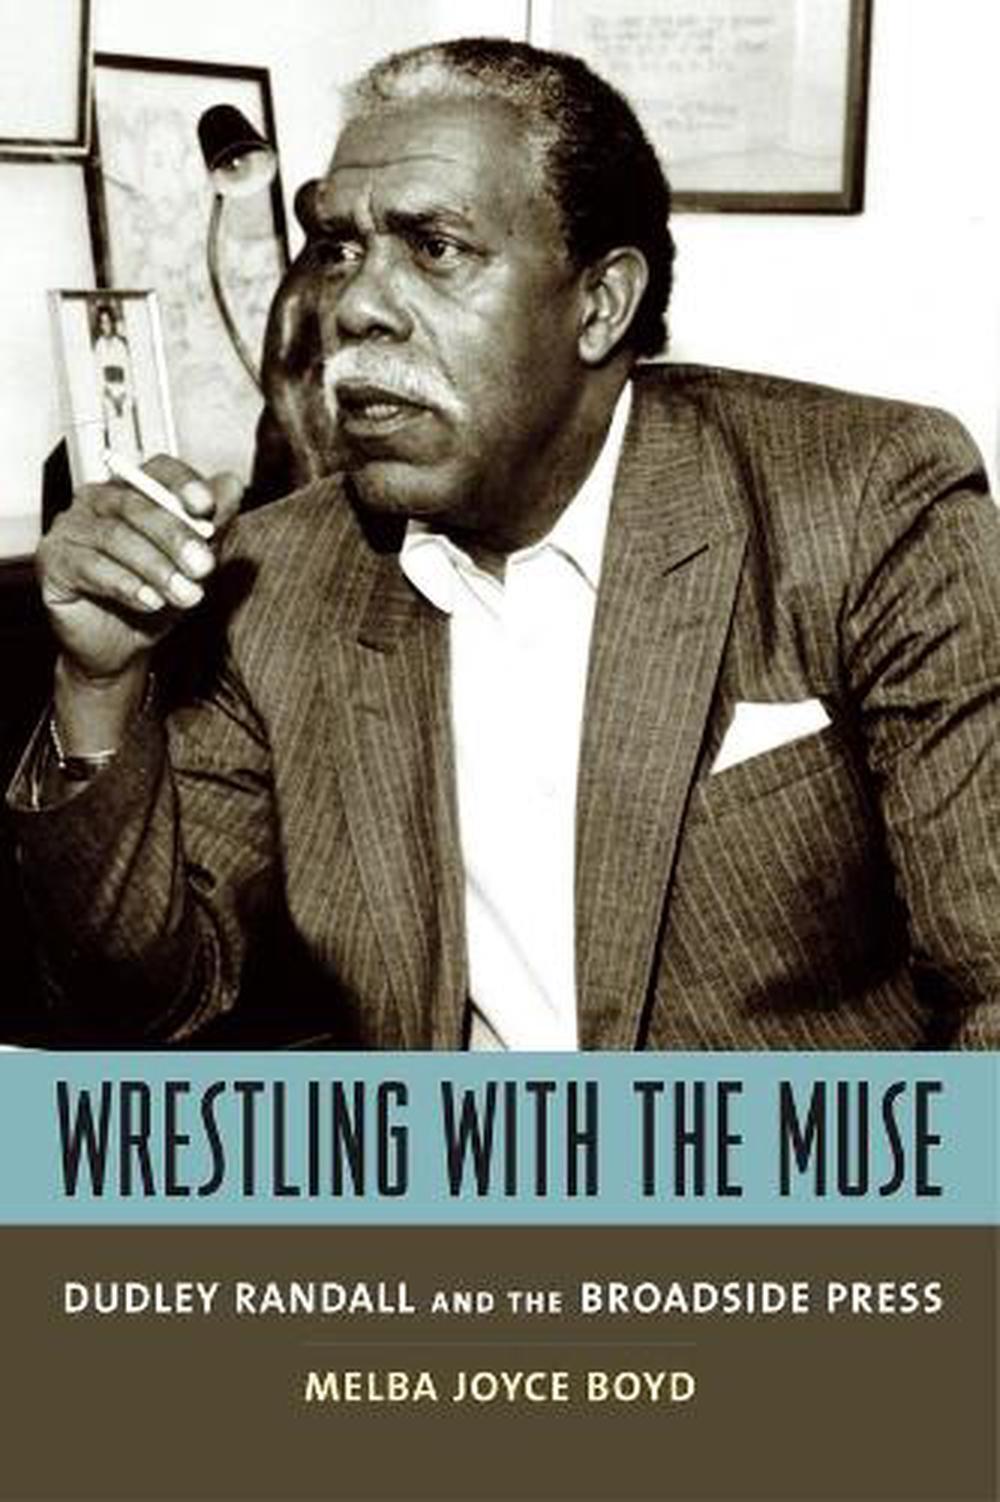 Wrestling with the Muse: Dudley Randall and the Broadside Press by Melba Joyce B